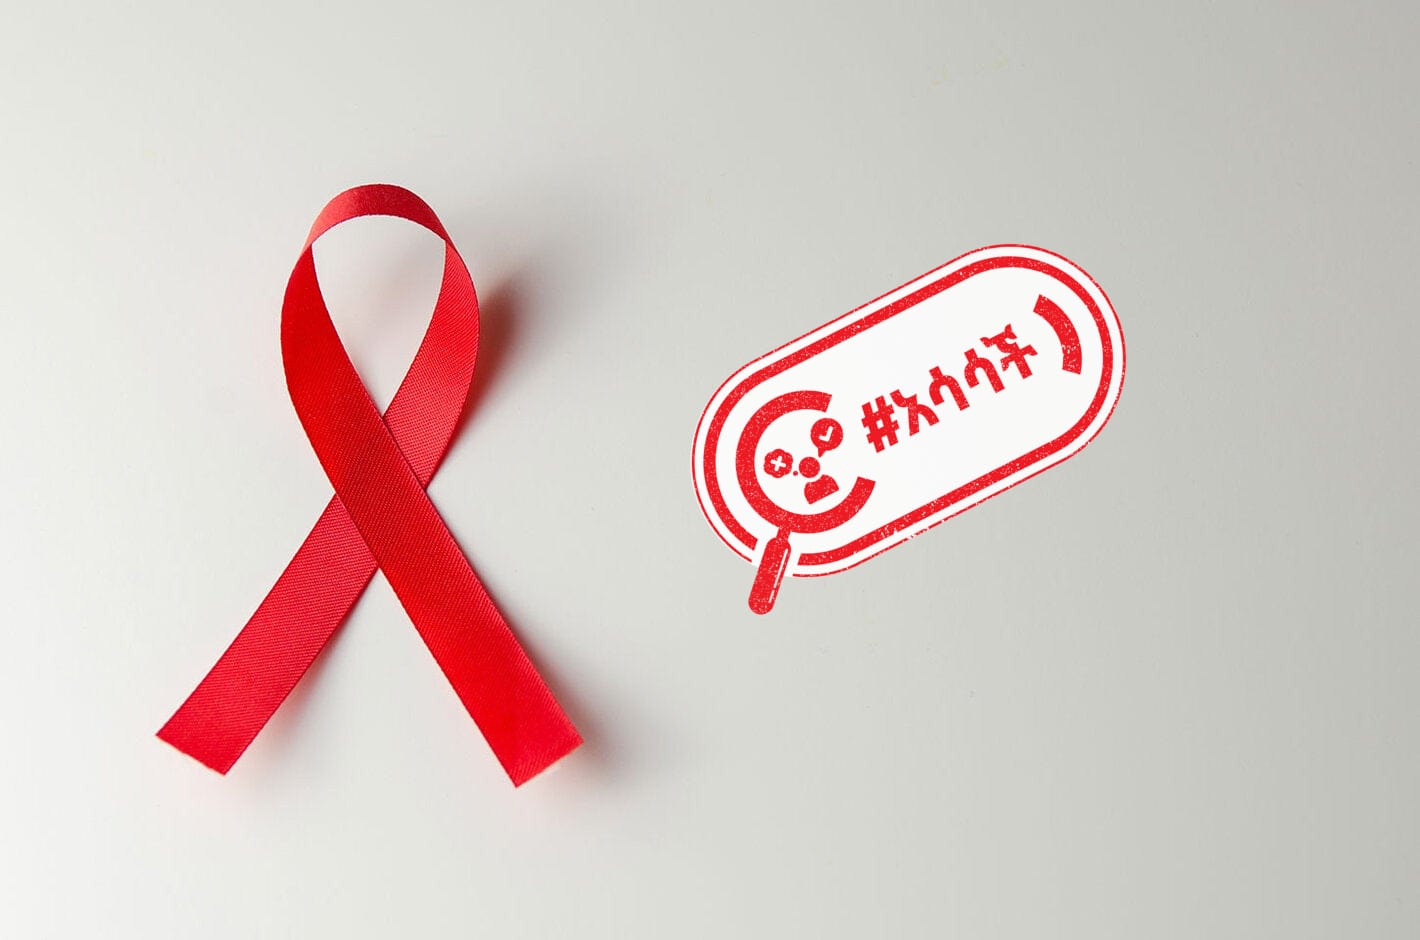 misleading information that is being spread about the HIV 'cure